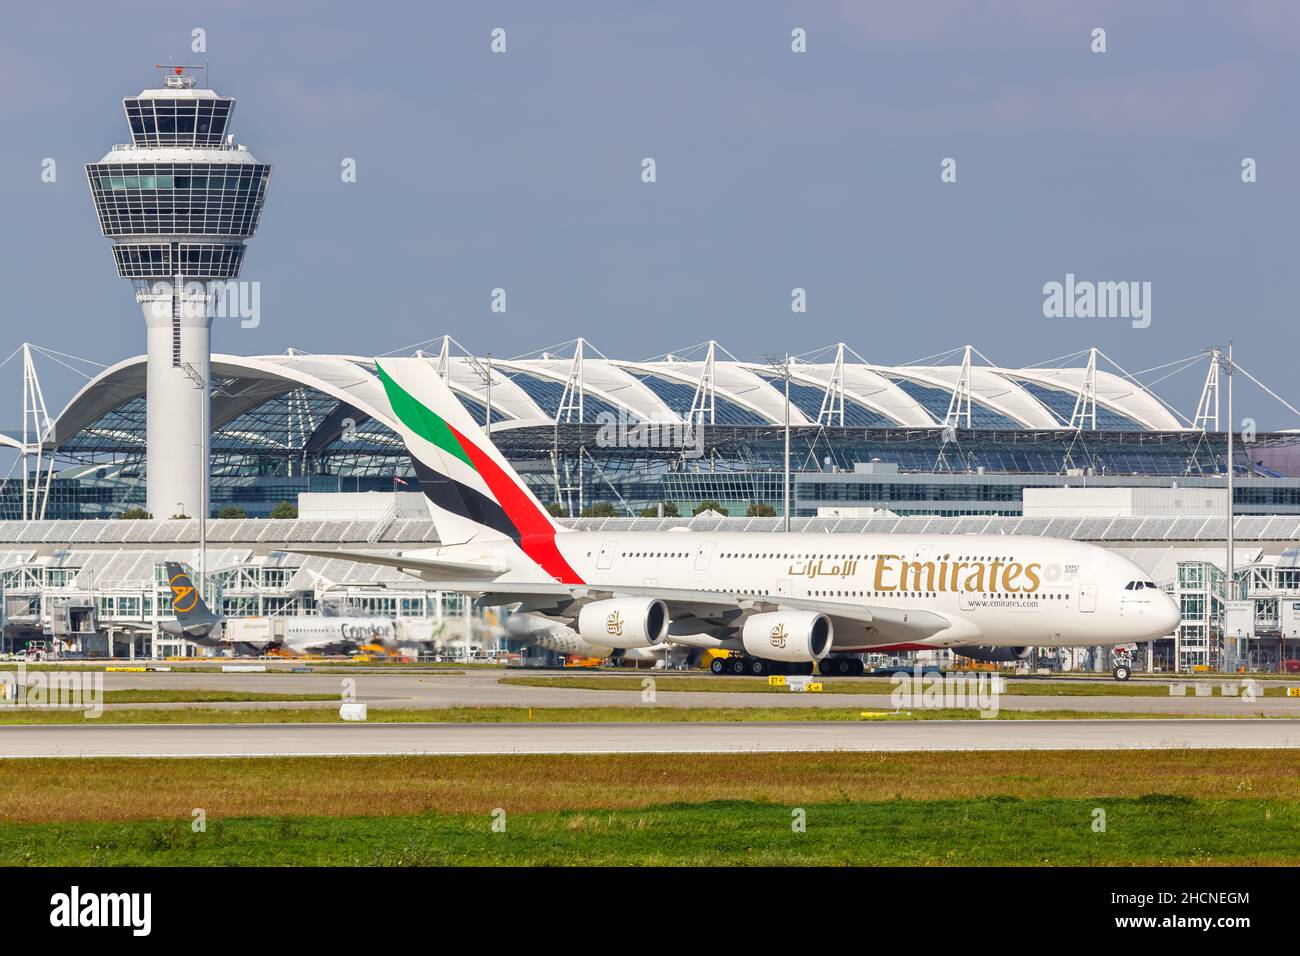 Munich, Germany - September 9, 2021: Emirates Airbus A380-800 airplane at Munich airport (MUC) in Germany. Stock Photo